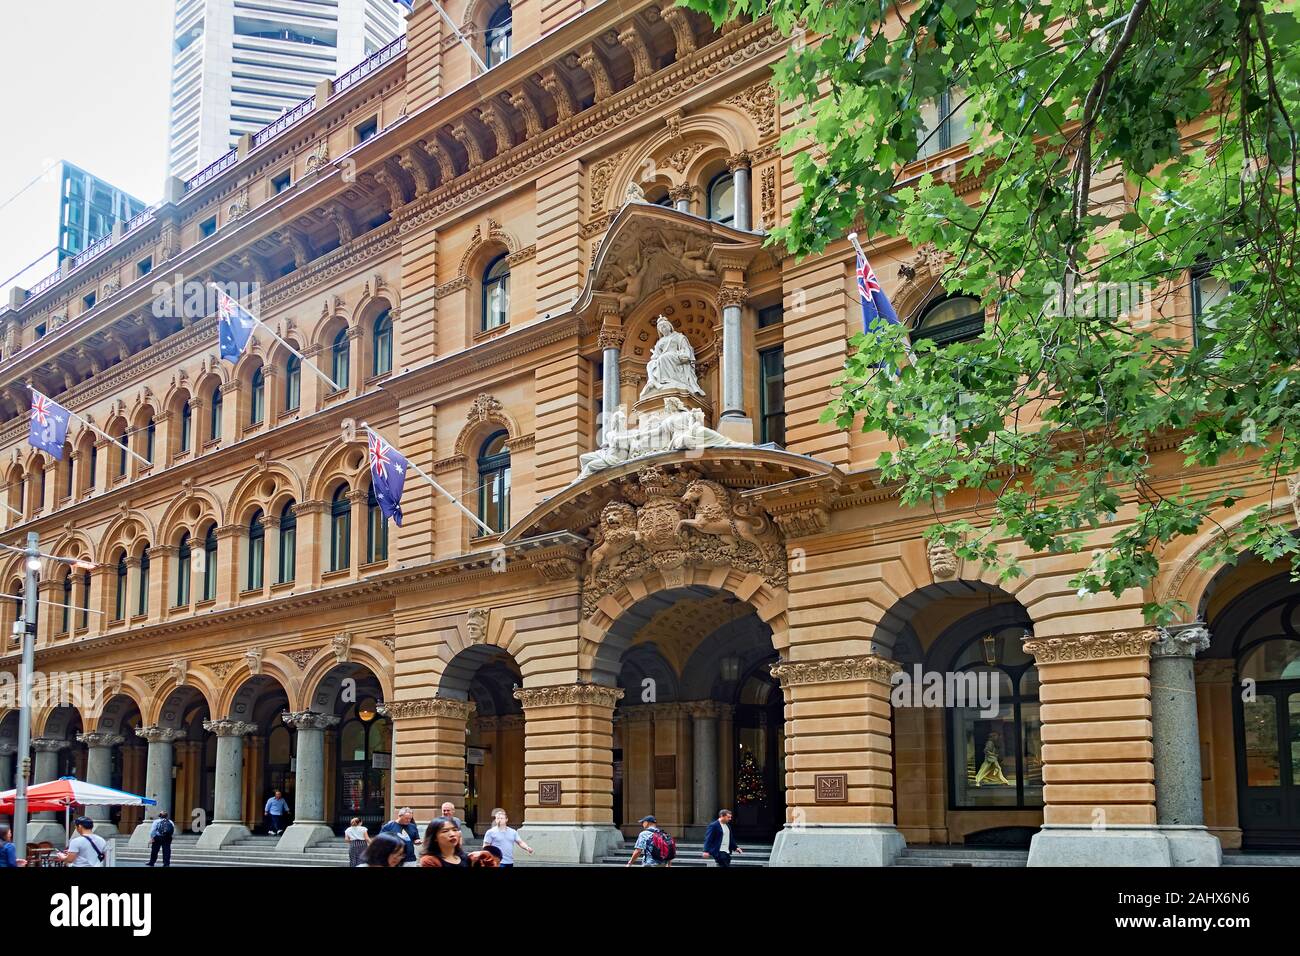 Facade of the old Sydney General Post Office building in Martin Place with statue of Queen Victoria above the main entrance. Stock Photo